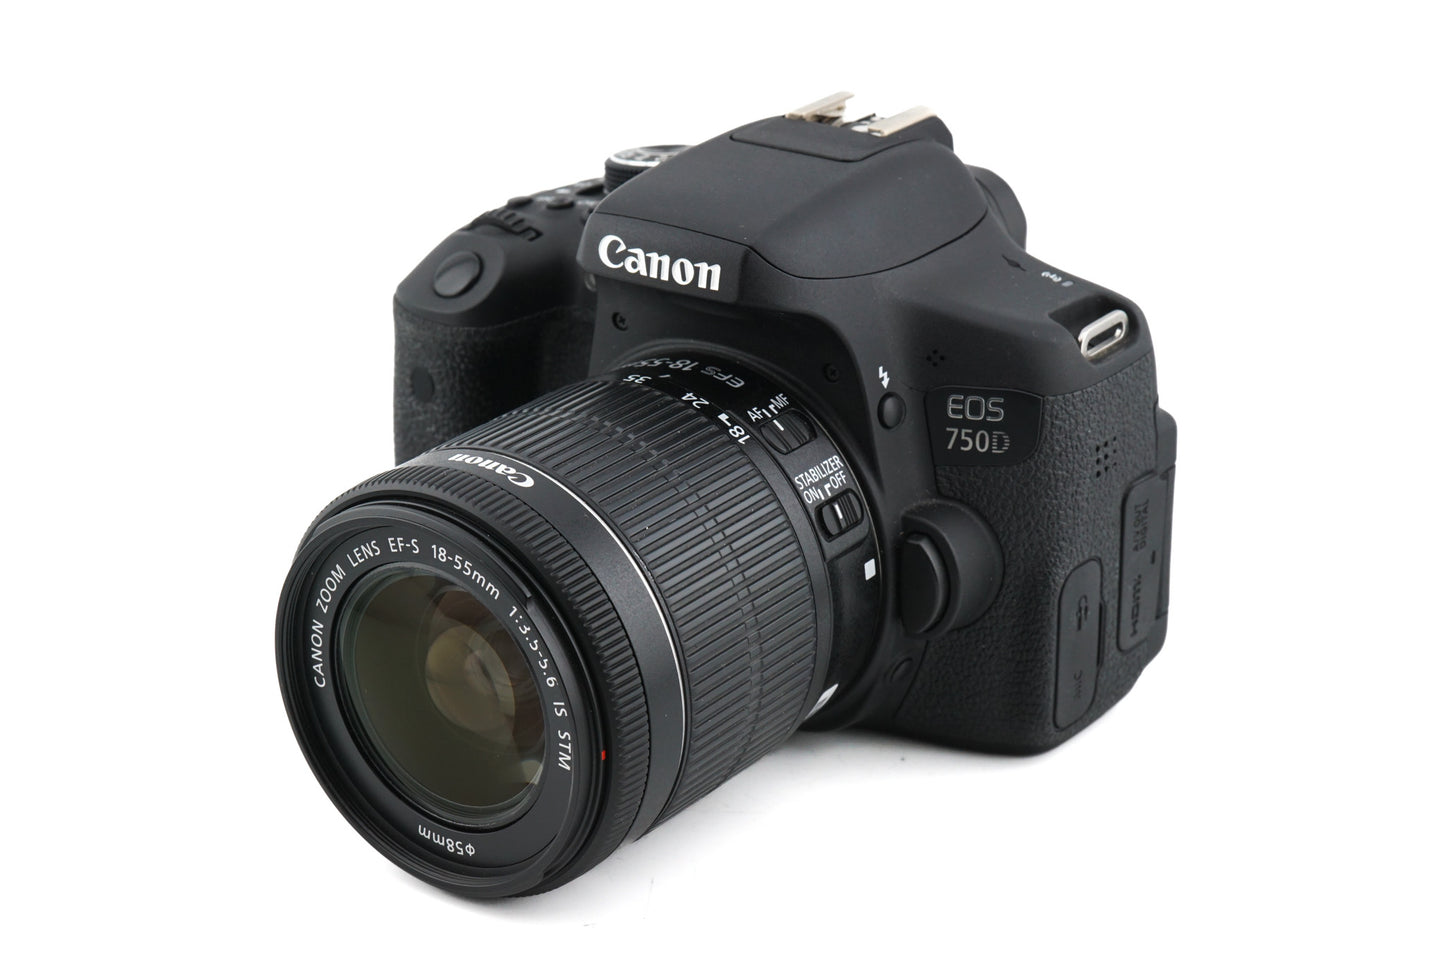 Canon EOS 750D + 18-55mm f3.5-5.6 IS STM